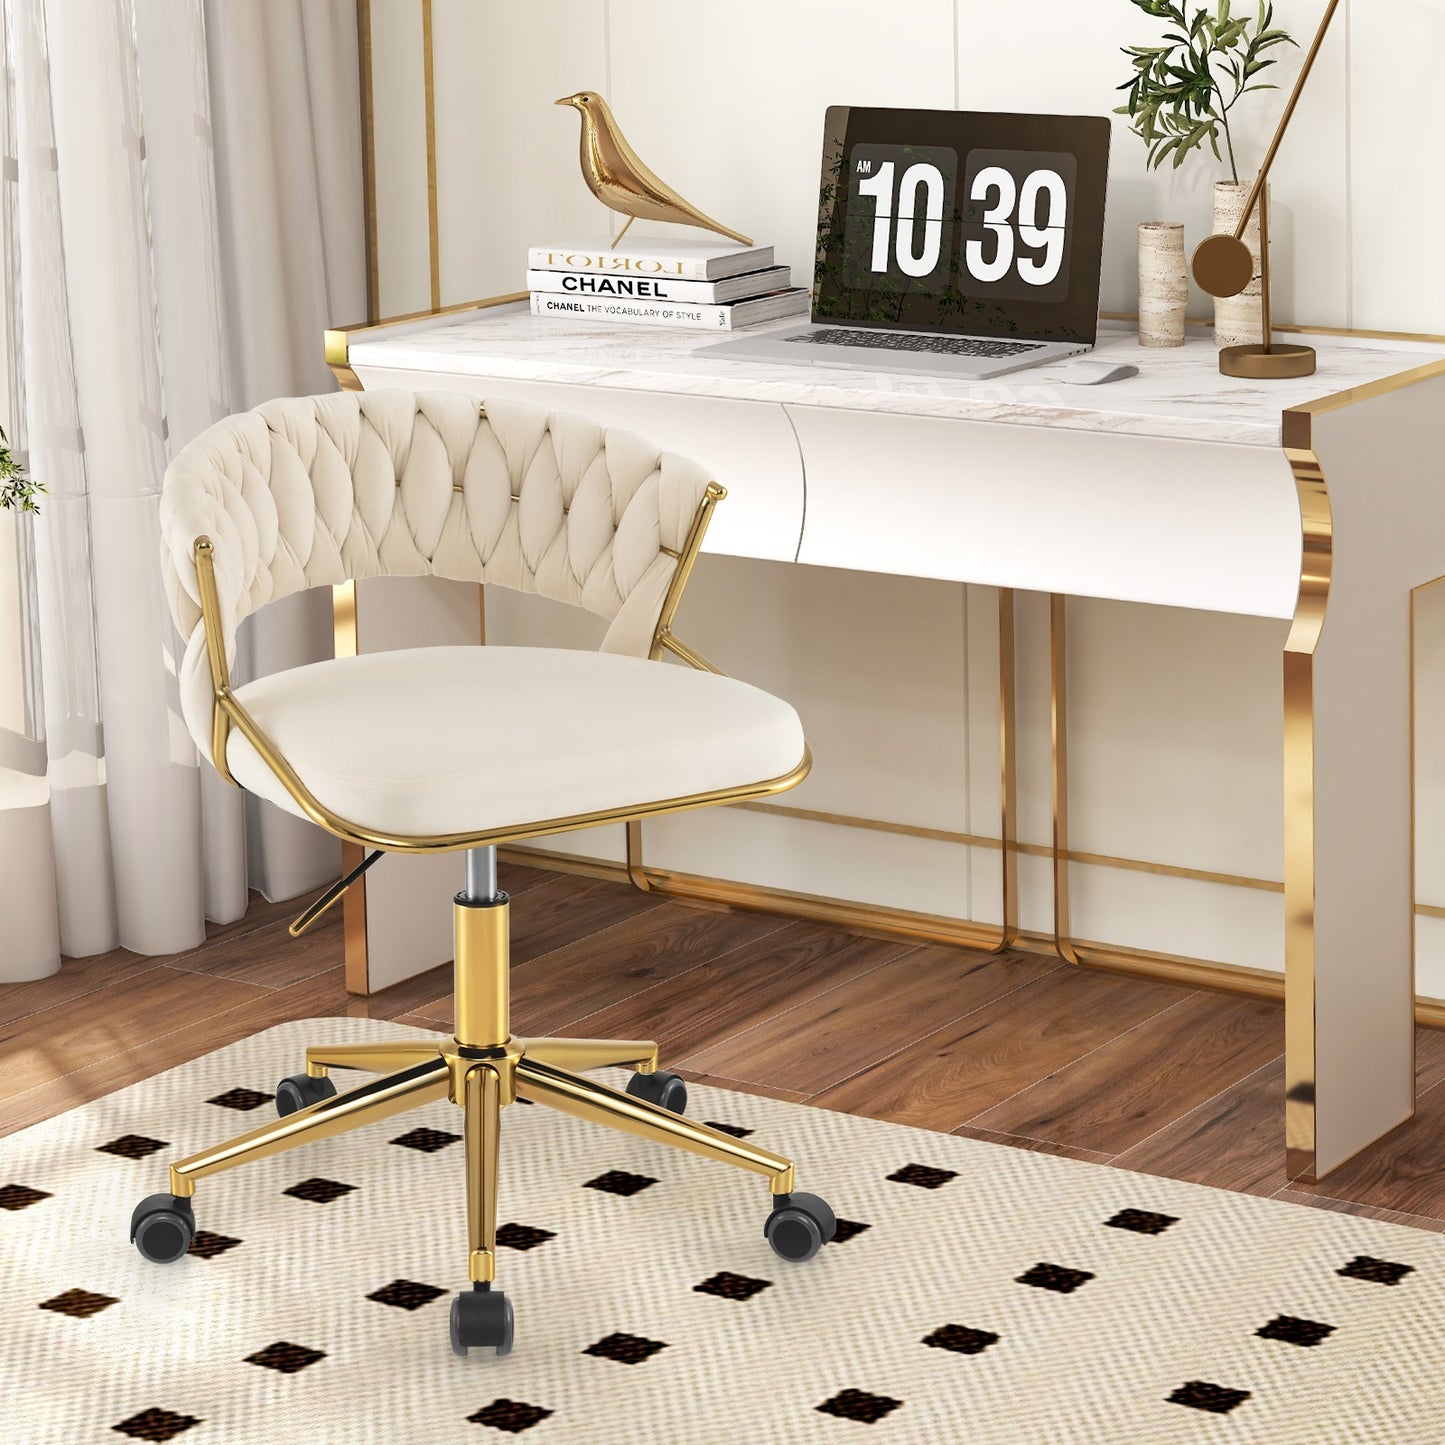 360° Height Adjustable Swivel Upholstered Desk Computer Chair with Hand-woven Back-Beige